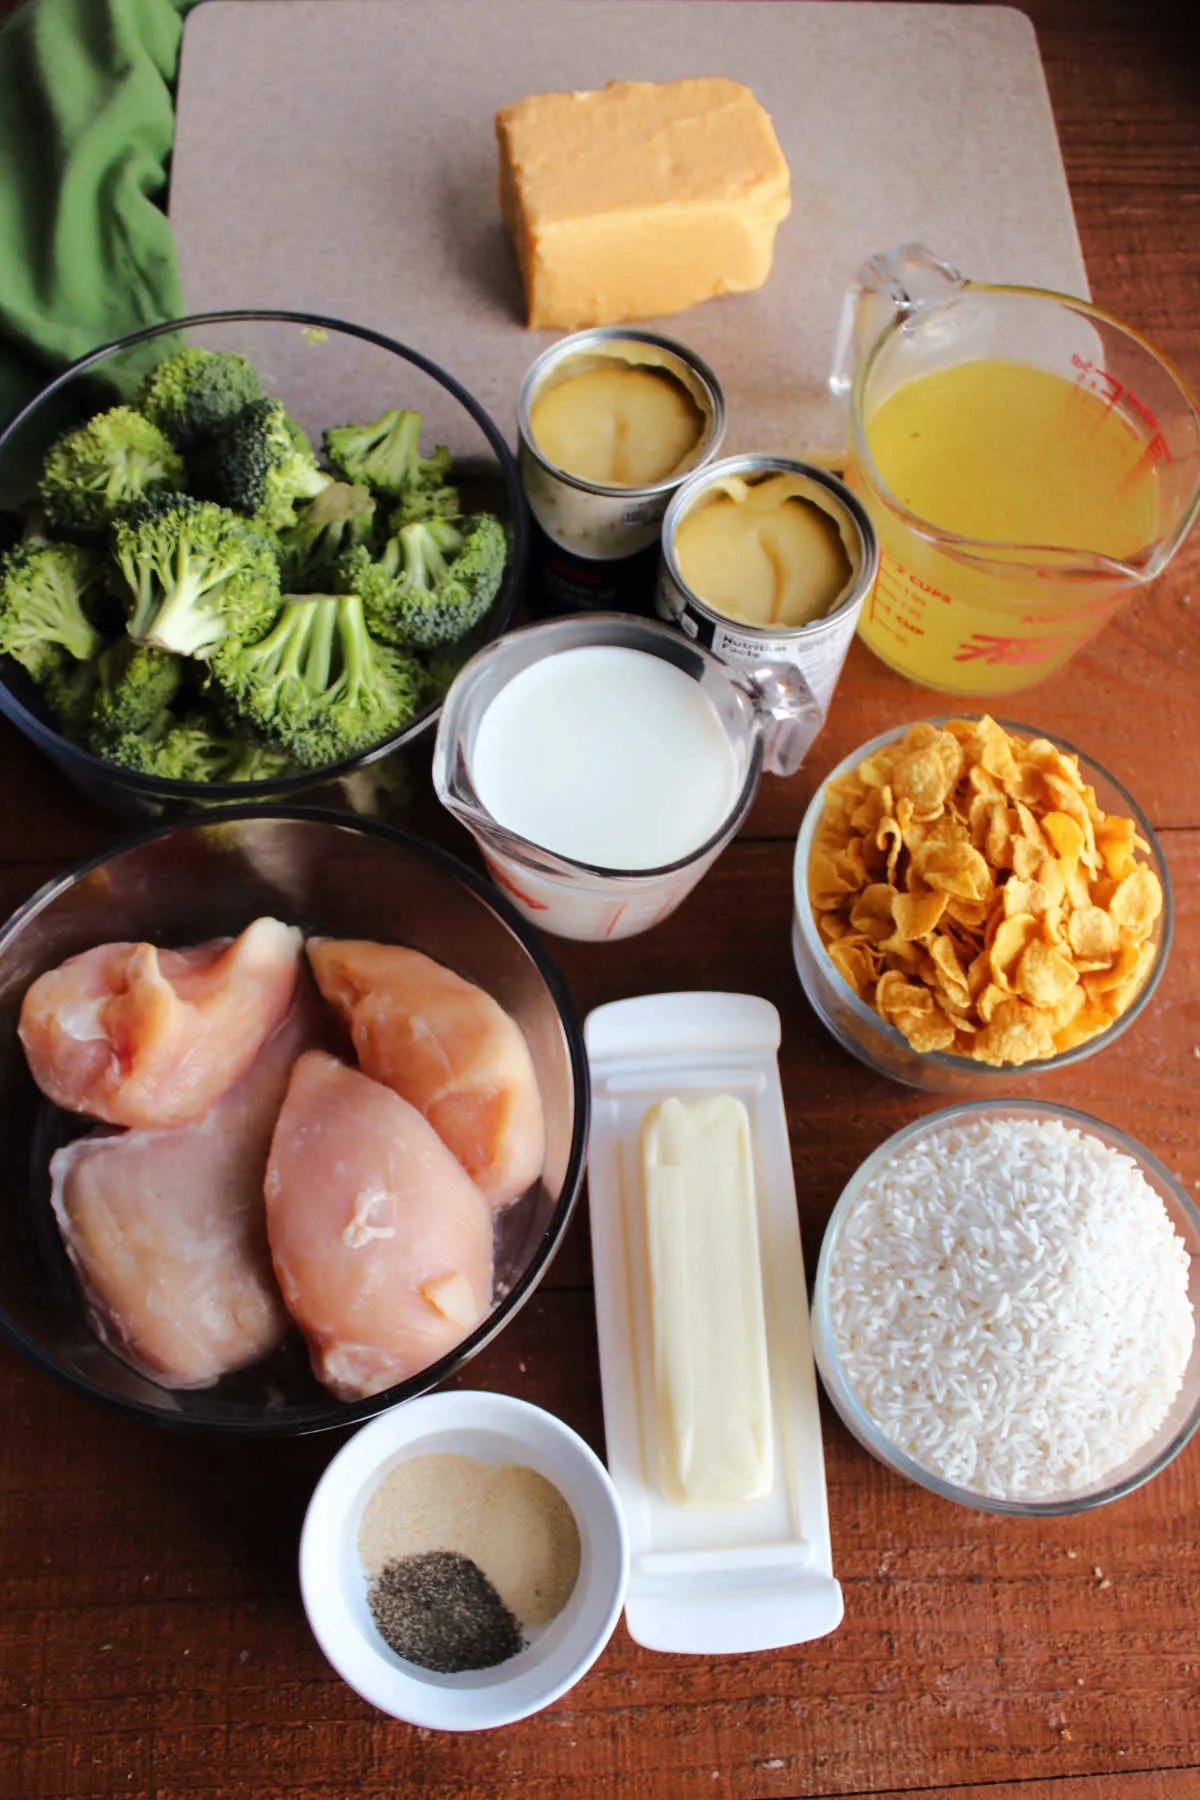 Ingredients including chicken, broccoli, velveeta, rice, cream of chicken soup, butter, milk, chicken broth, and seasonings ready to be made into casserole.